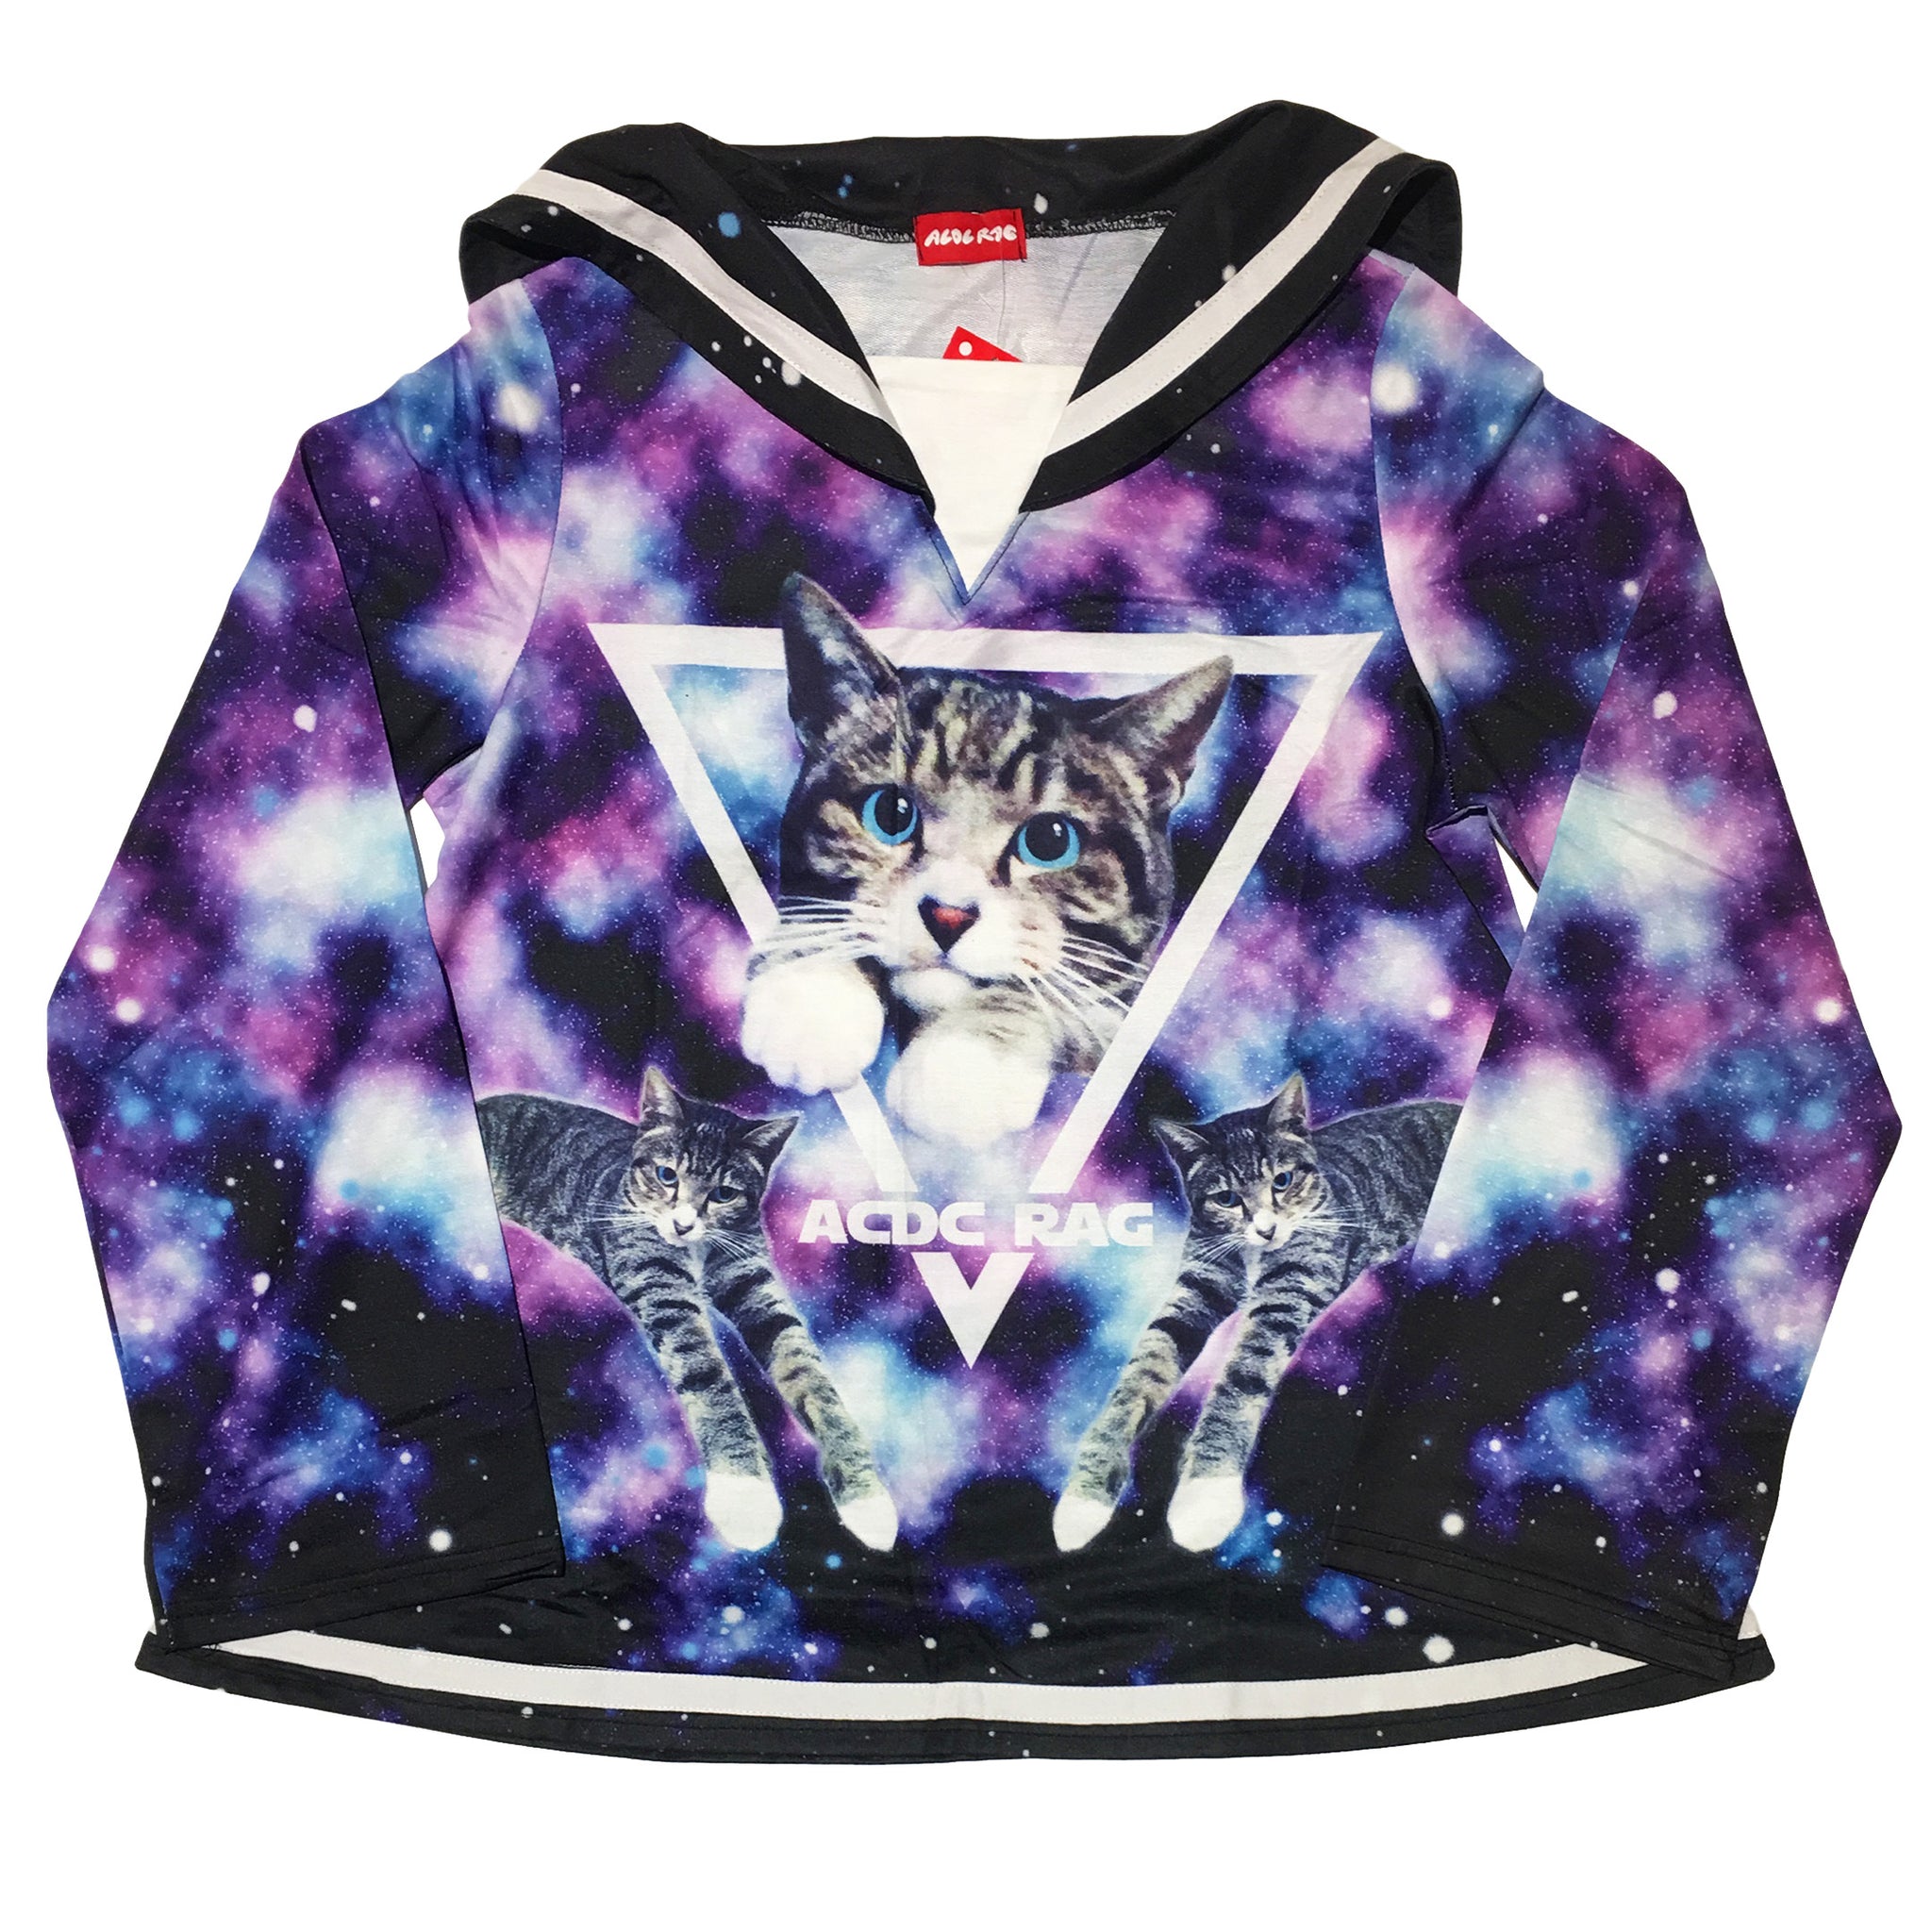 "Galaxy Cat" Sailor Top by ACDC RAG